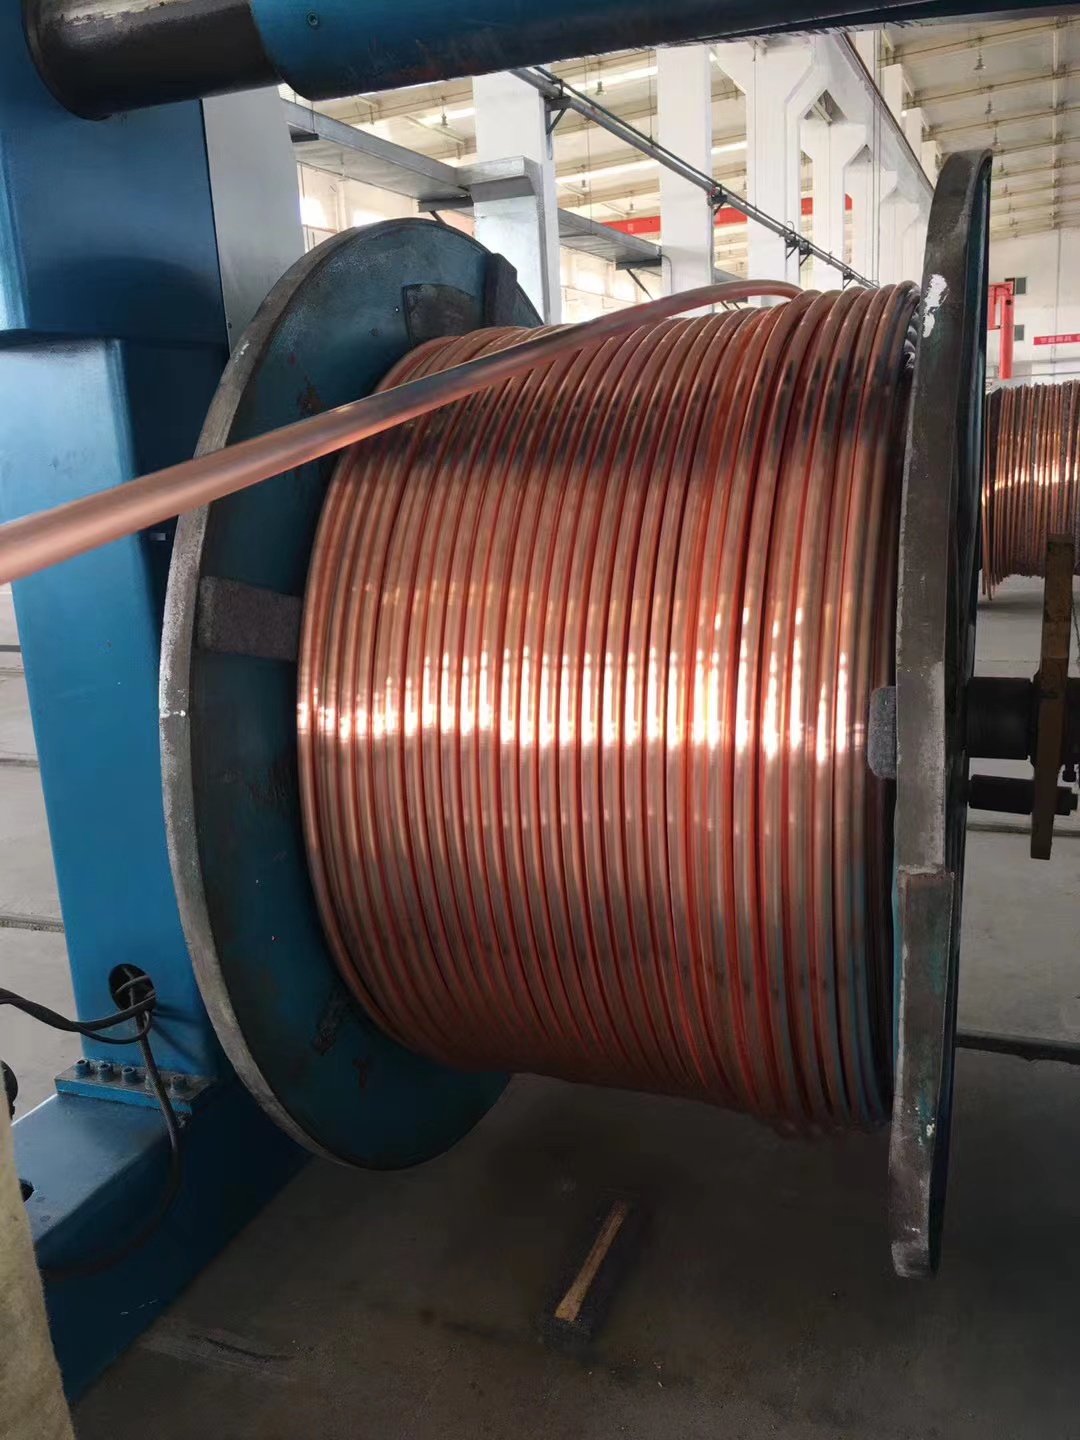 roll of copper tubing